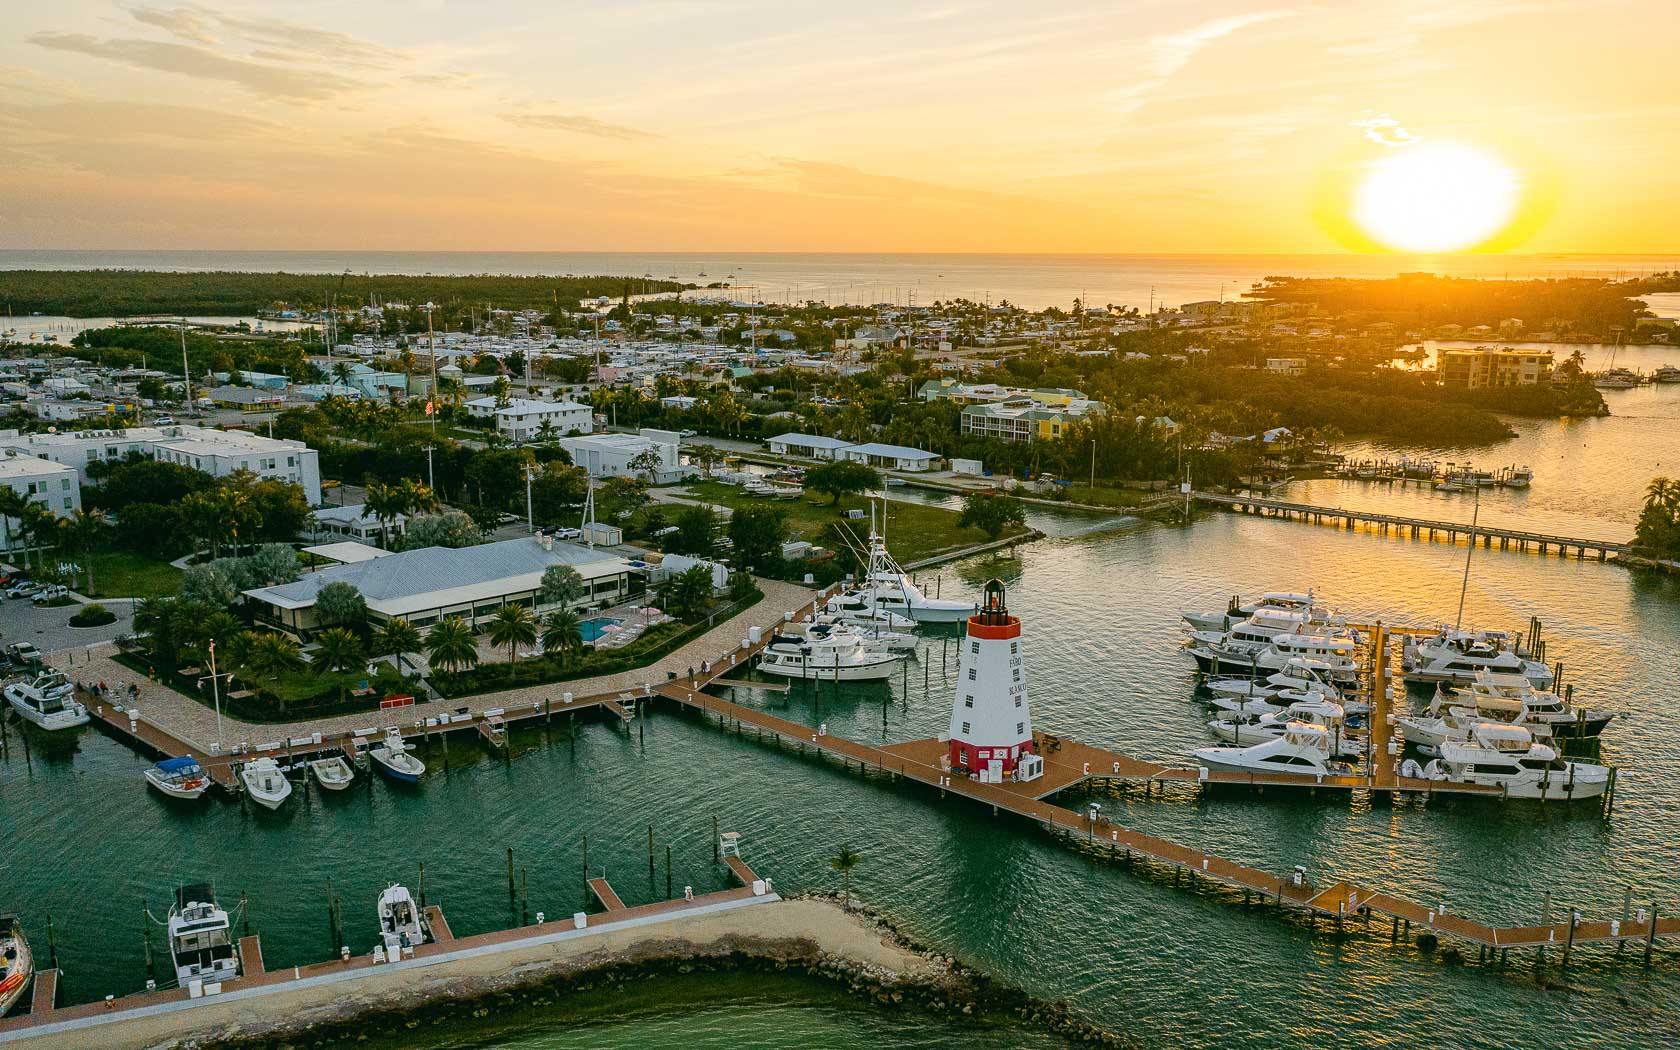 Let's dive deep into getting to know Marathon, Florida!